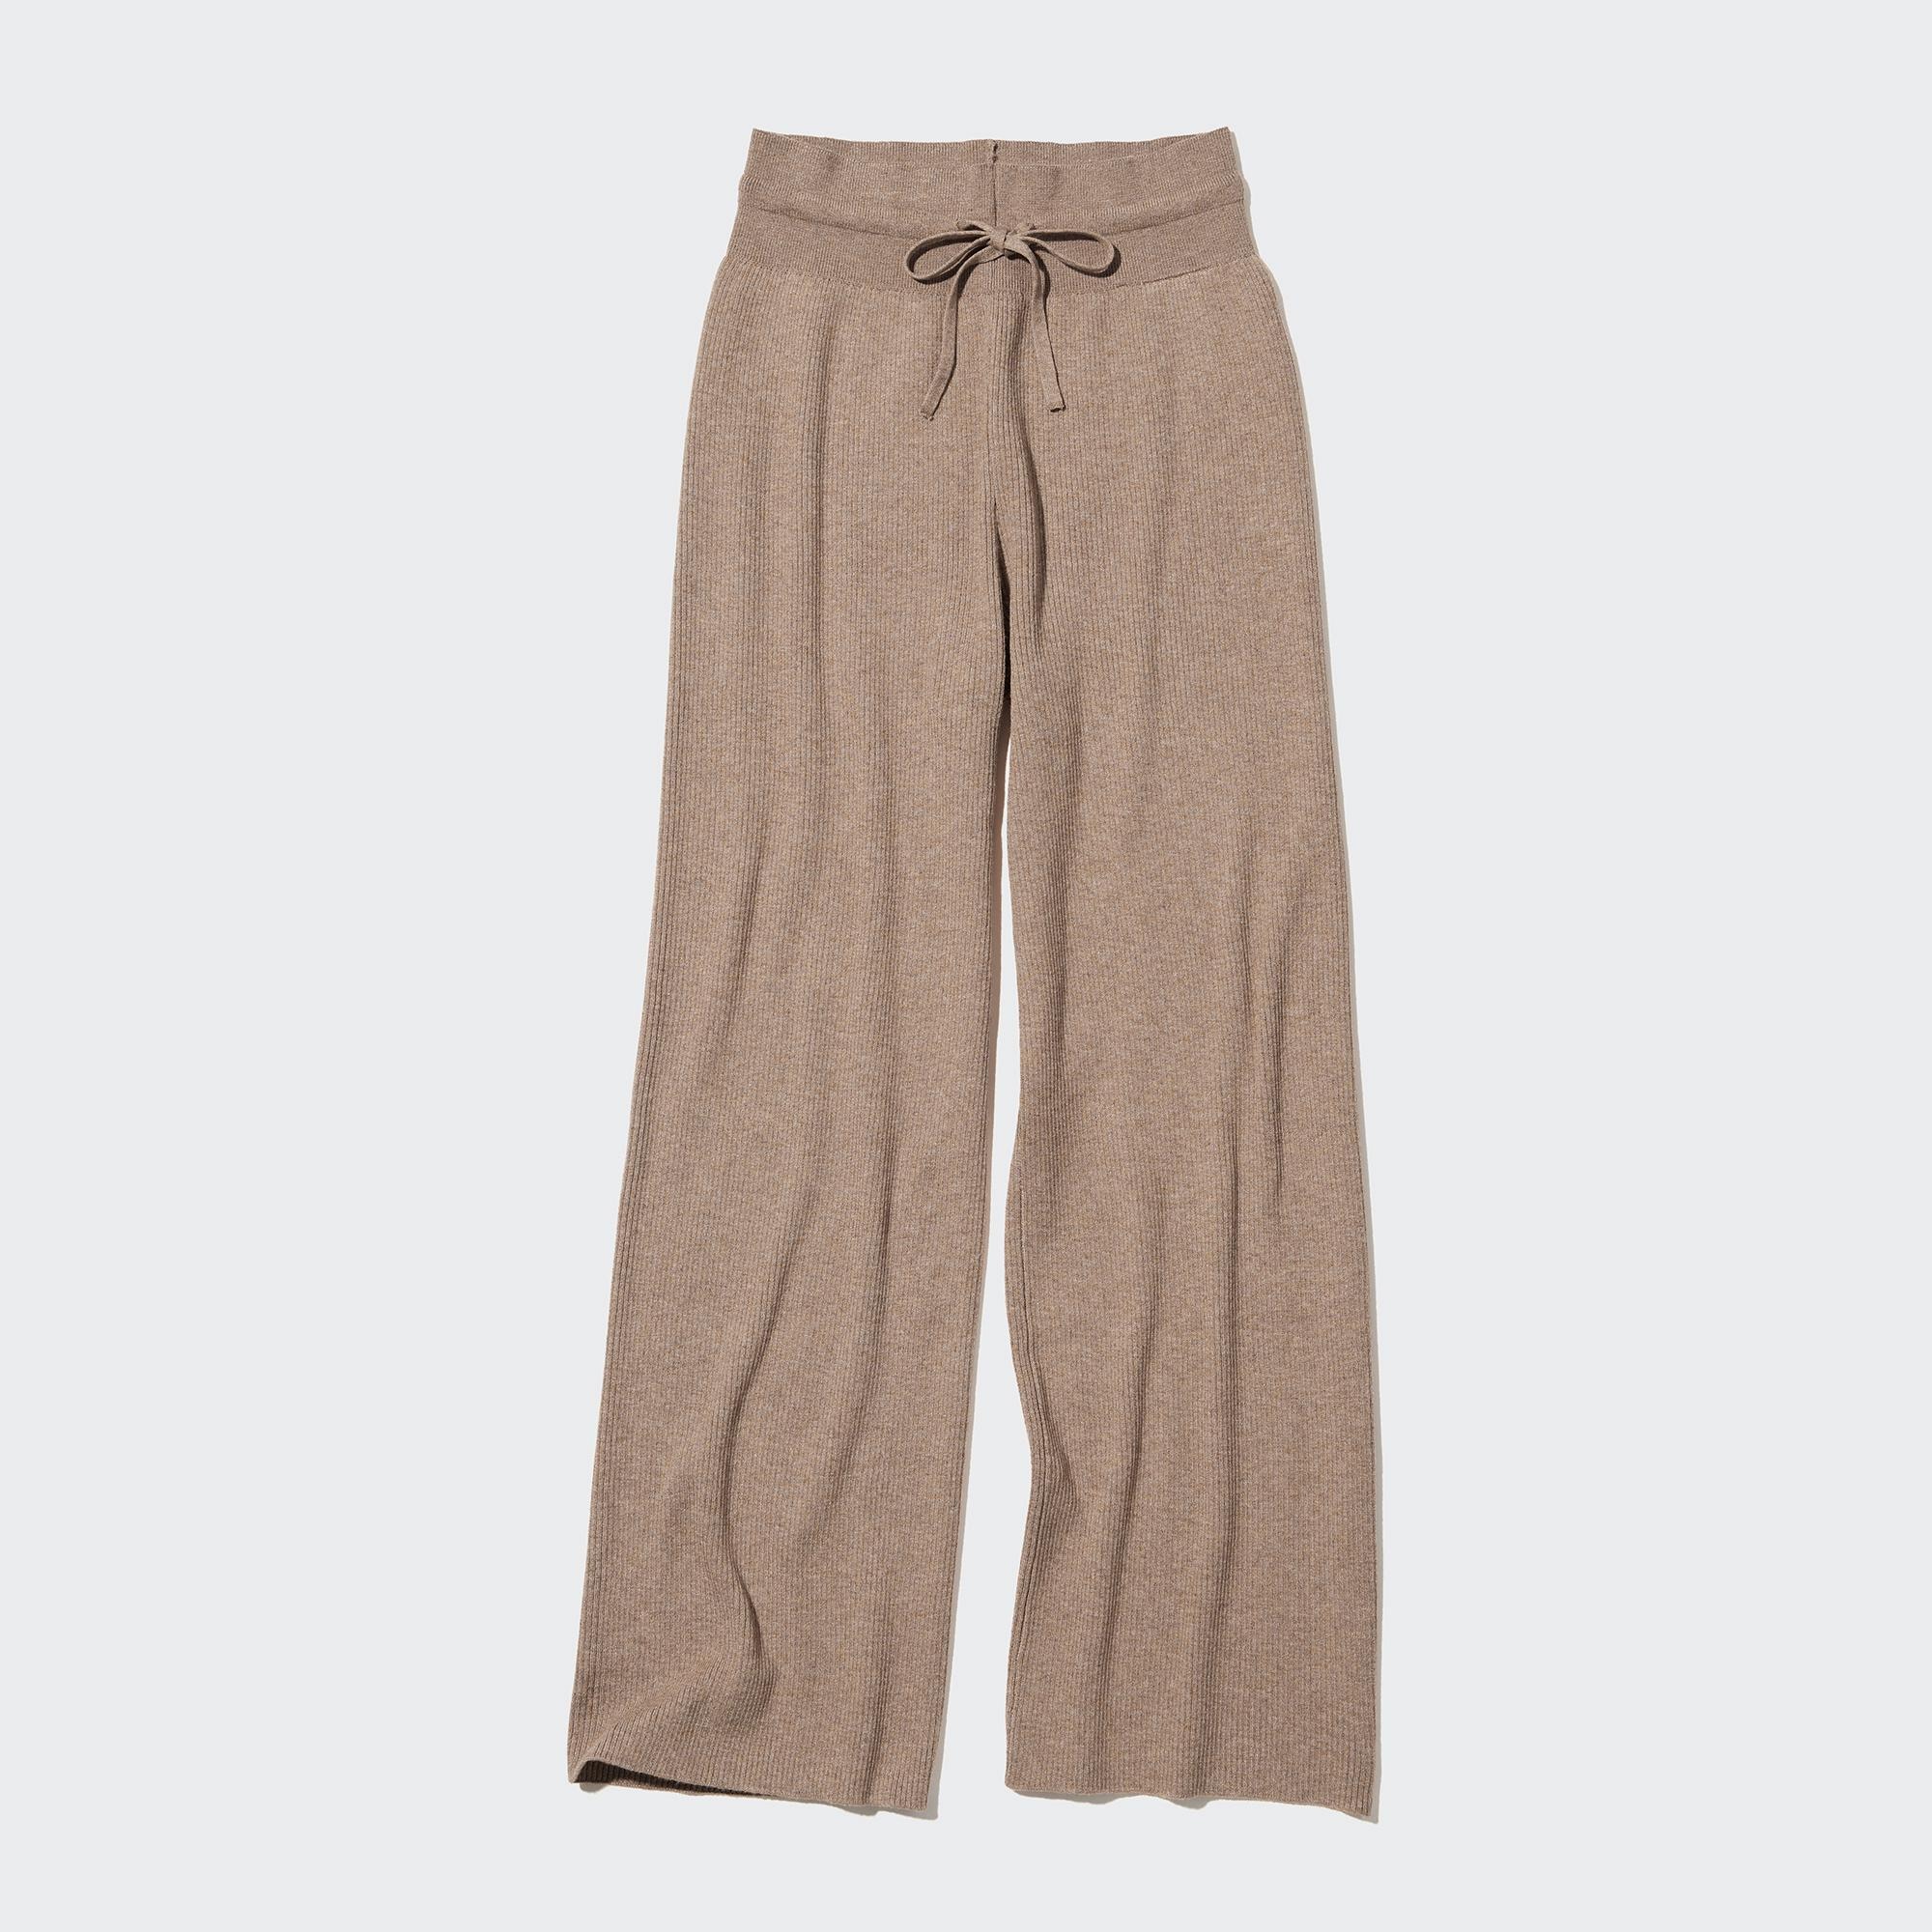 Washable Knit Ribbed Trousers